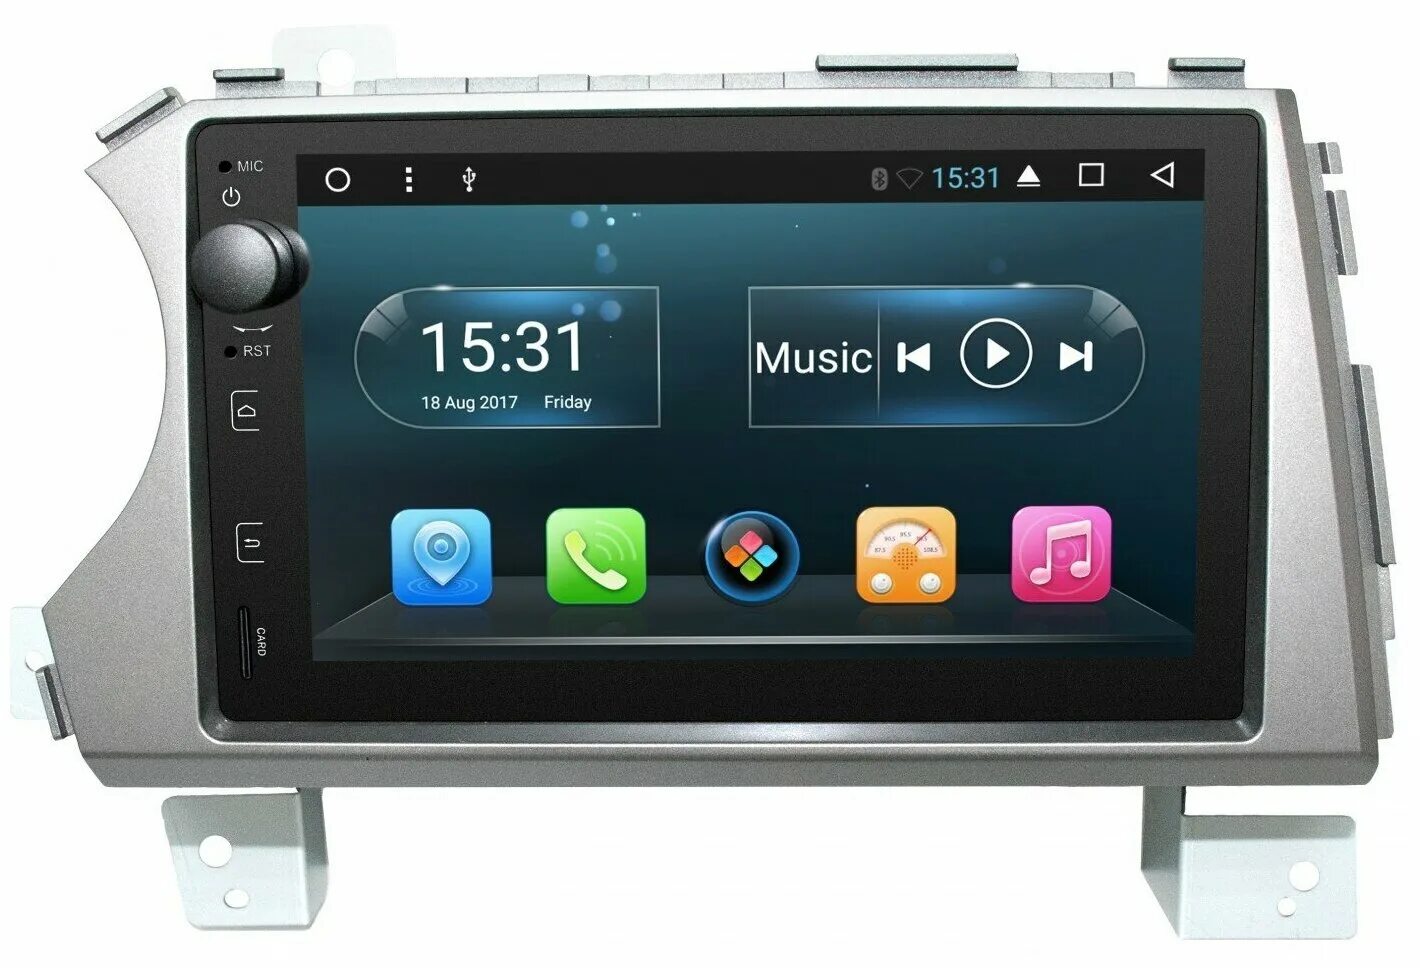 SSANGYONG Actyon магнитола Android. Автомагнитола Ssang Actyon New. Штатная магнитола SSANGYONG Actyon Sport. Штатная магнитола Unison t1 для Ssang Yong Actyon 2014-2016.